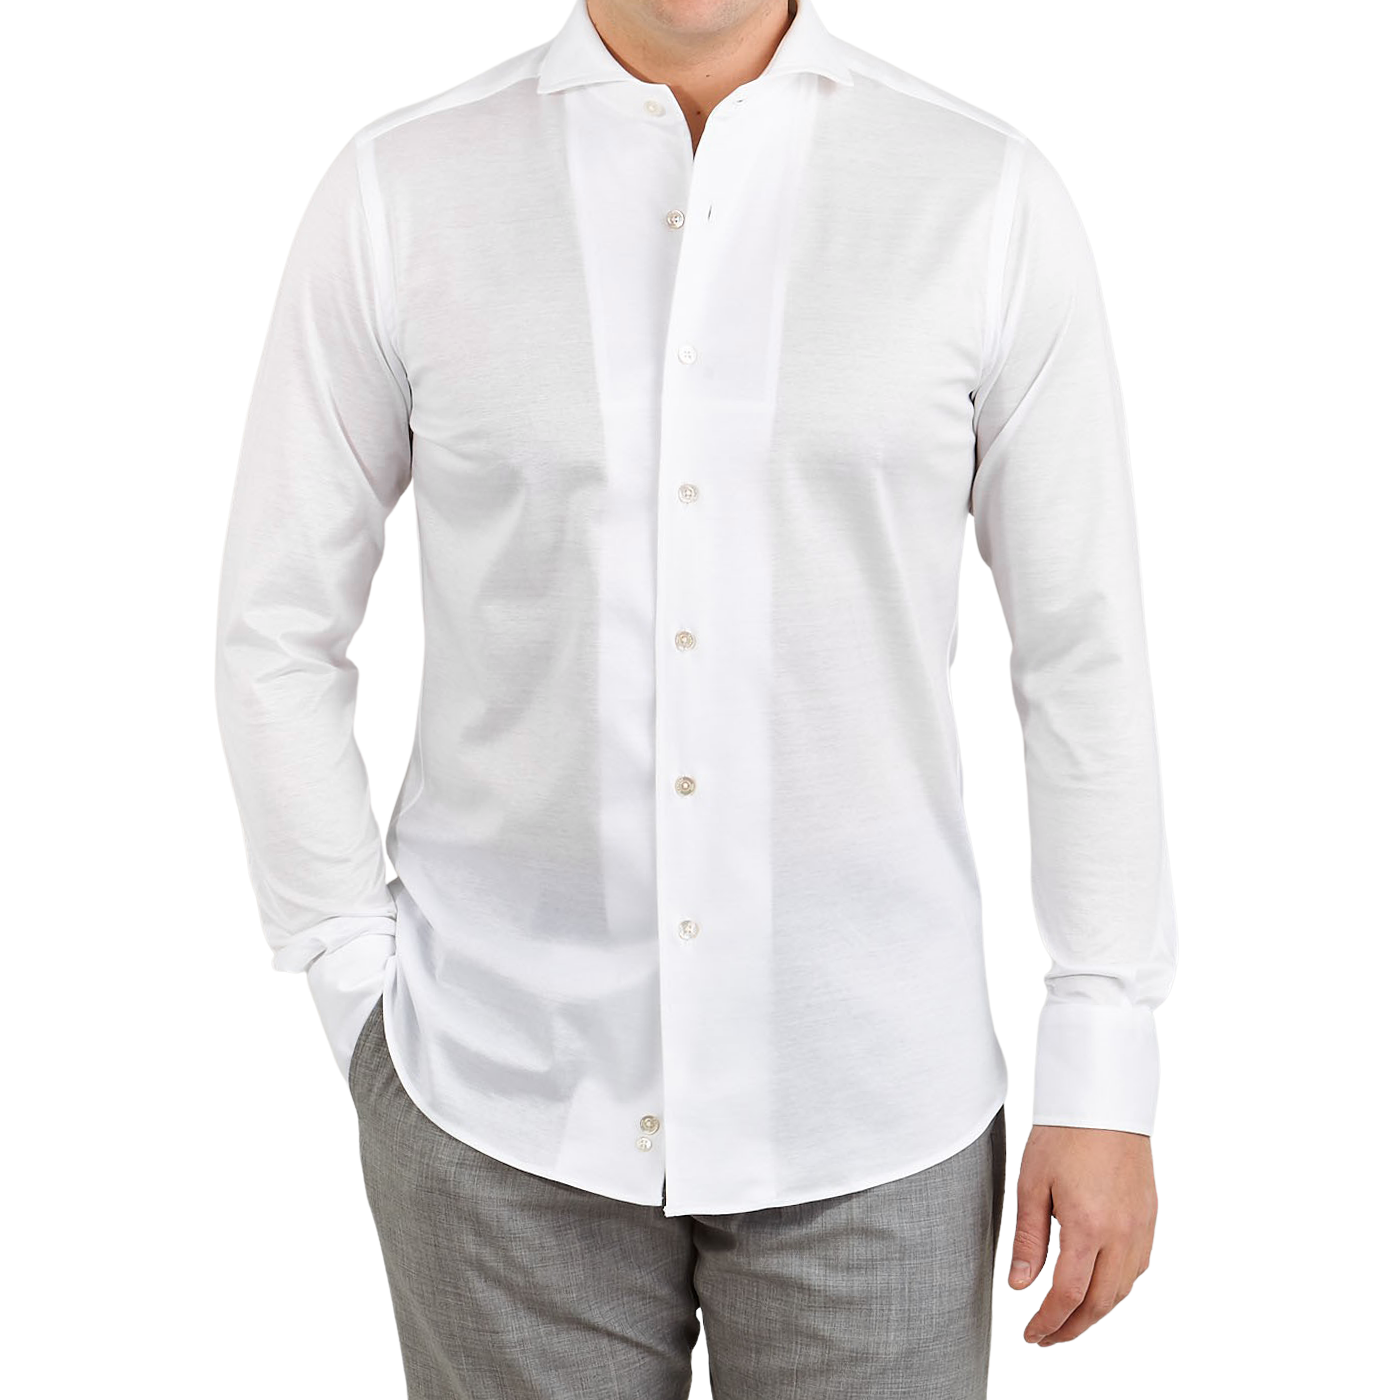 Canali White Cotton Jersey Casual Shirt Front